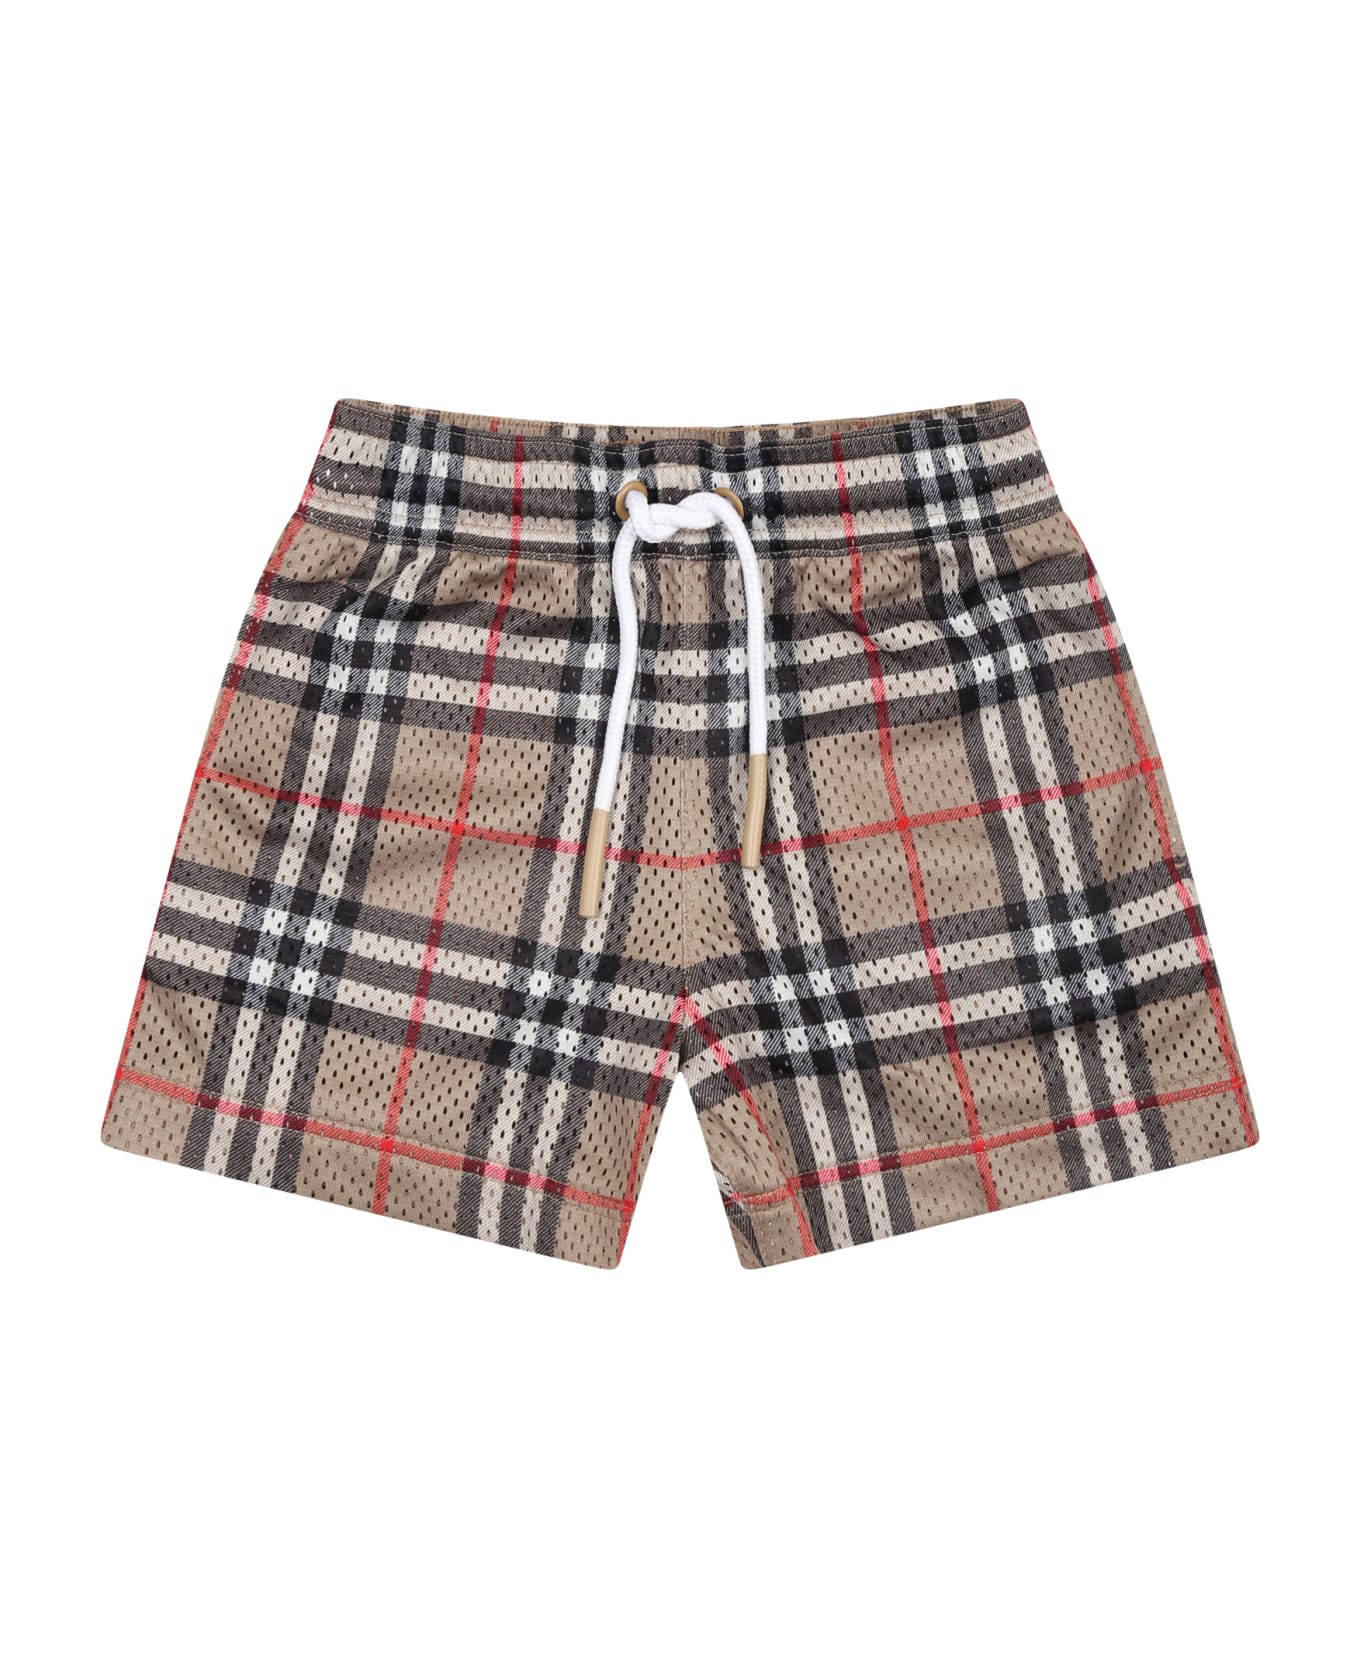 Burberry Beige Sports Shorts For Baby Boy With Iconic Vintage Check - Beige